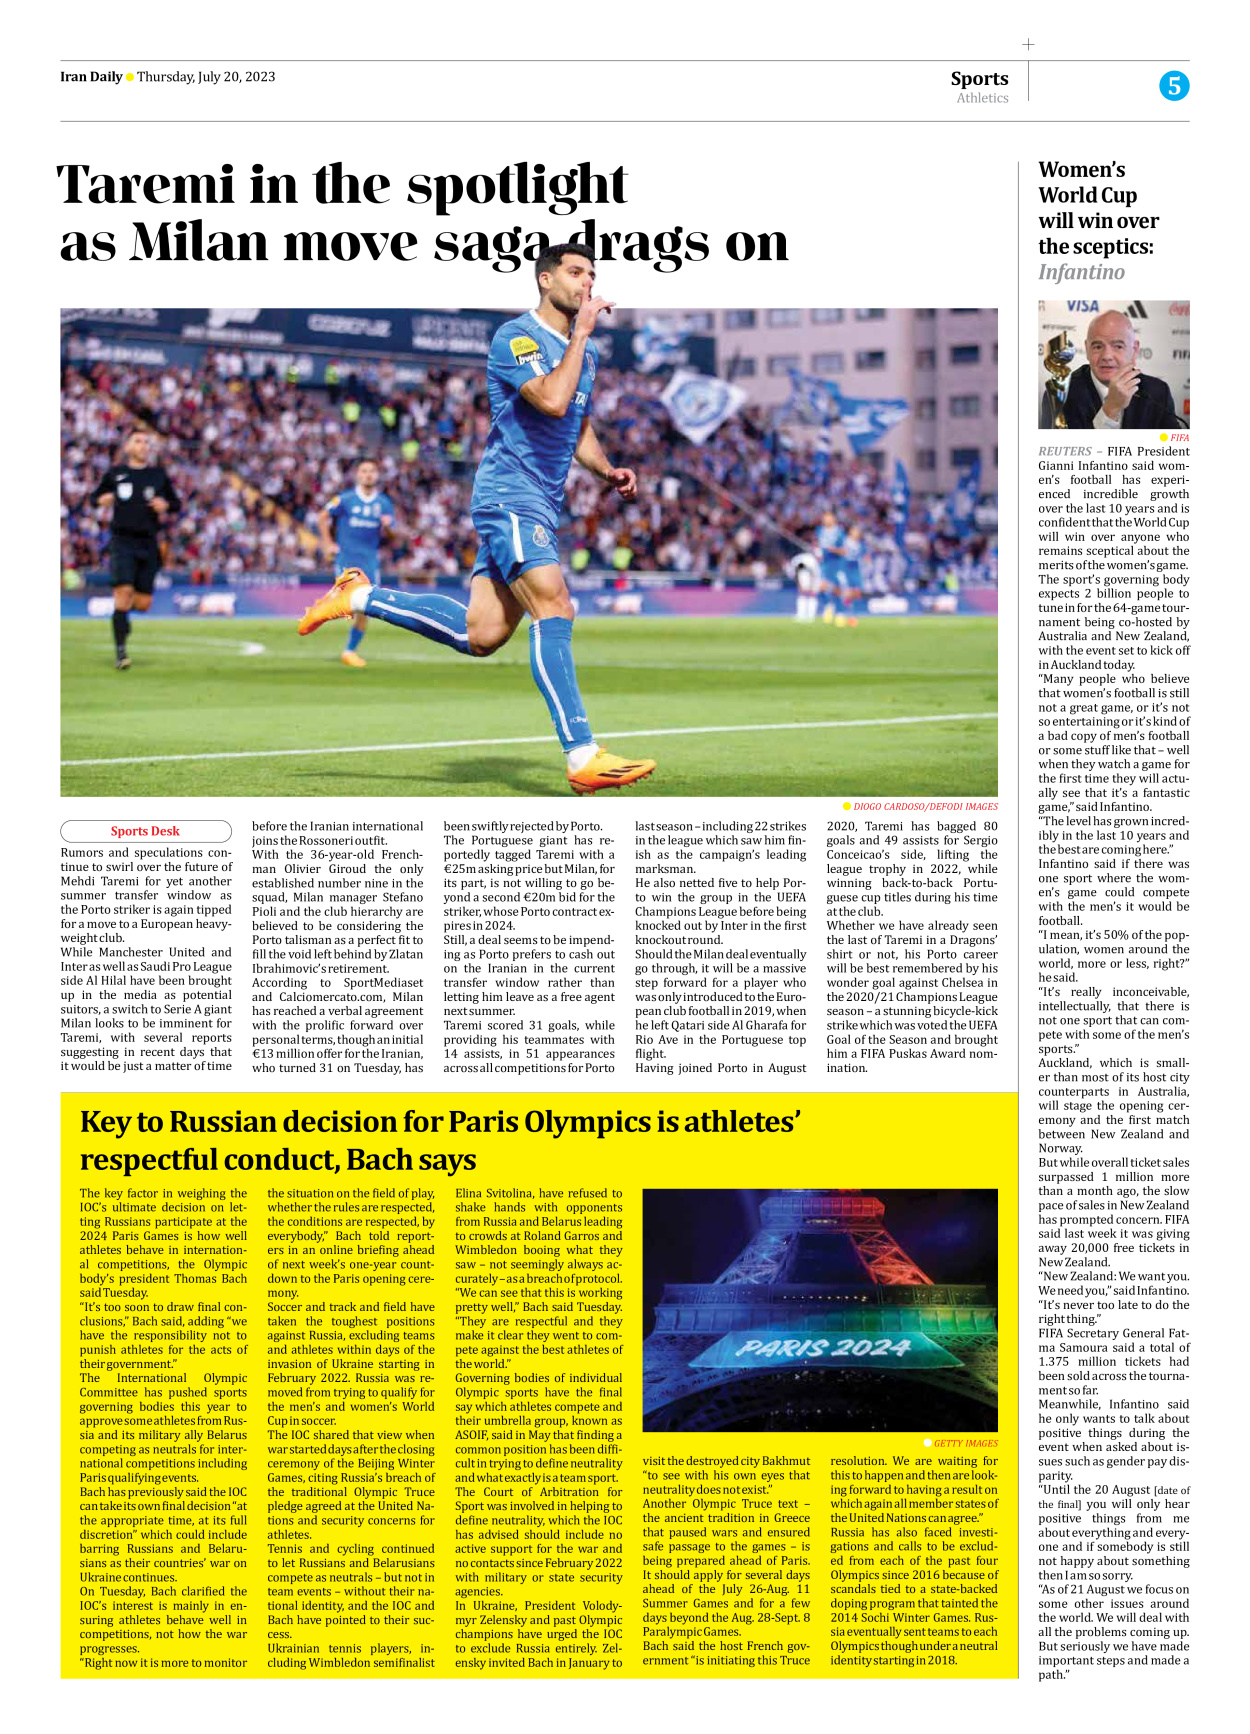 Iran Daily - Number Seven Thousand Three Hundred and Forty Four - 20 July 2023 - Page 5